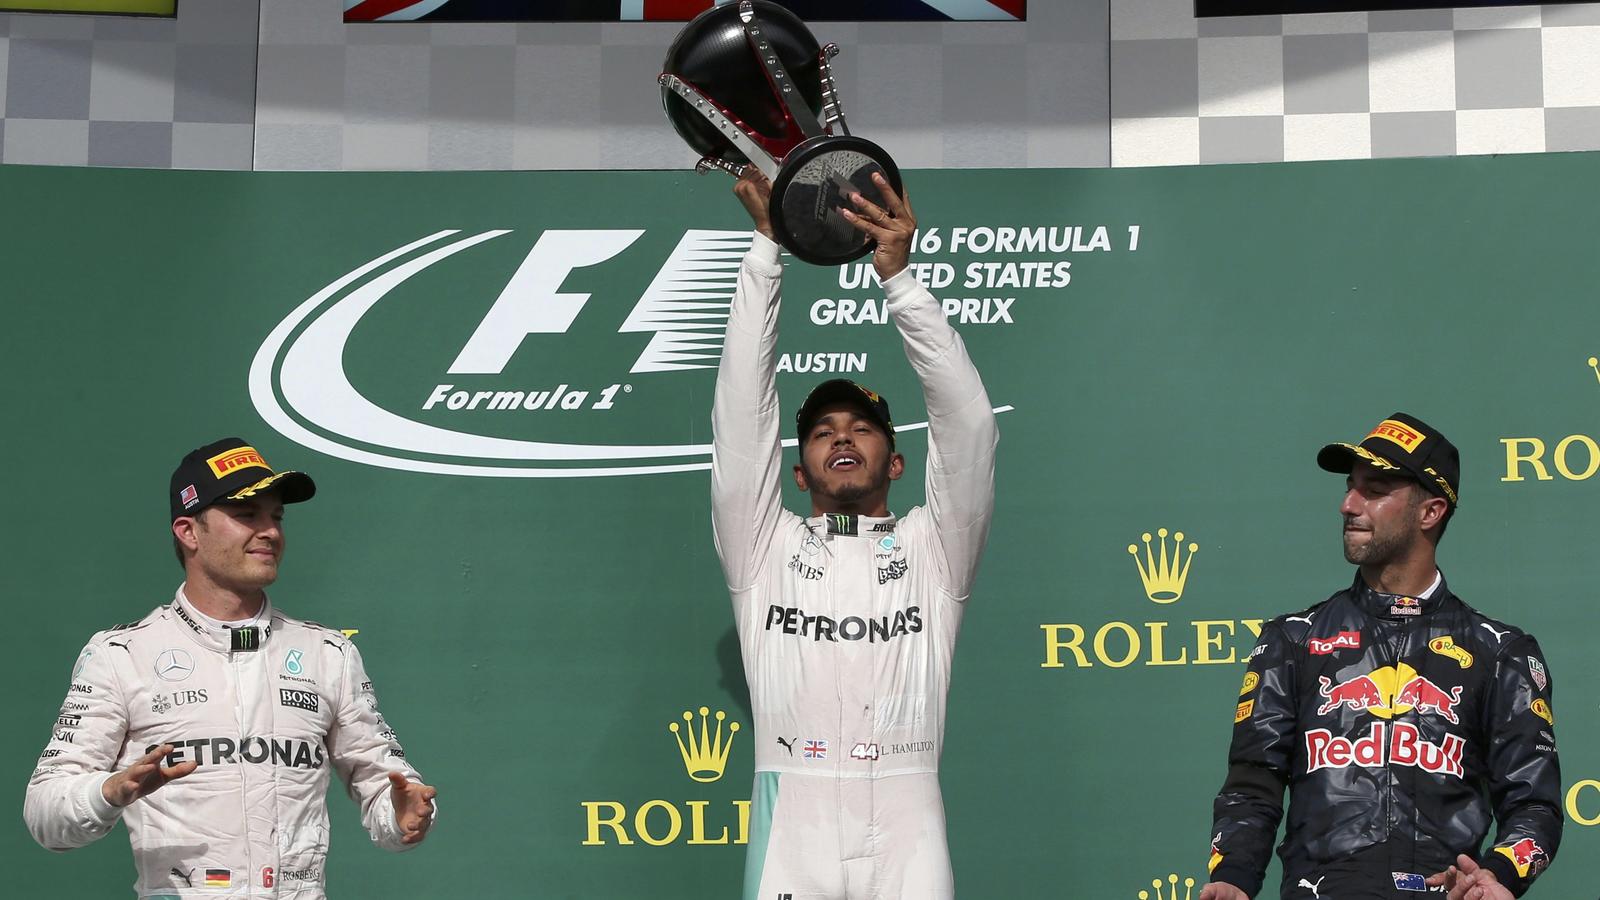 Formula One F1 - U.S. Grand Prix - Circuit of the Americas, Austin, Texas, U.S., 23/10/16. Mercedes' Lewis Hamilton of Britain raises his victory trophy as second placed finisher and teammate Nico Rosberg of Germany (L) and third placed Red Bull's Da